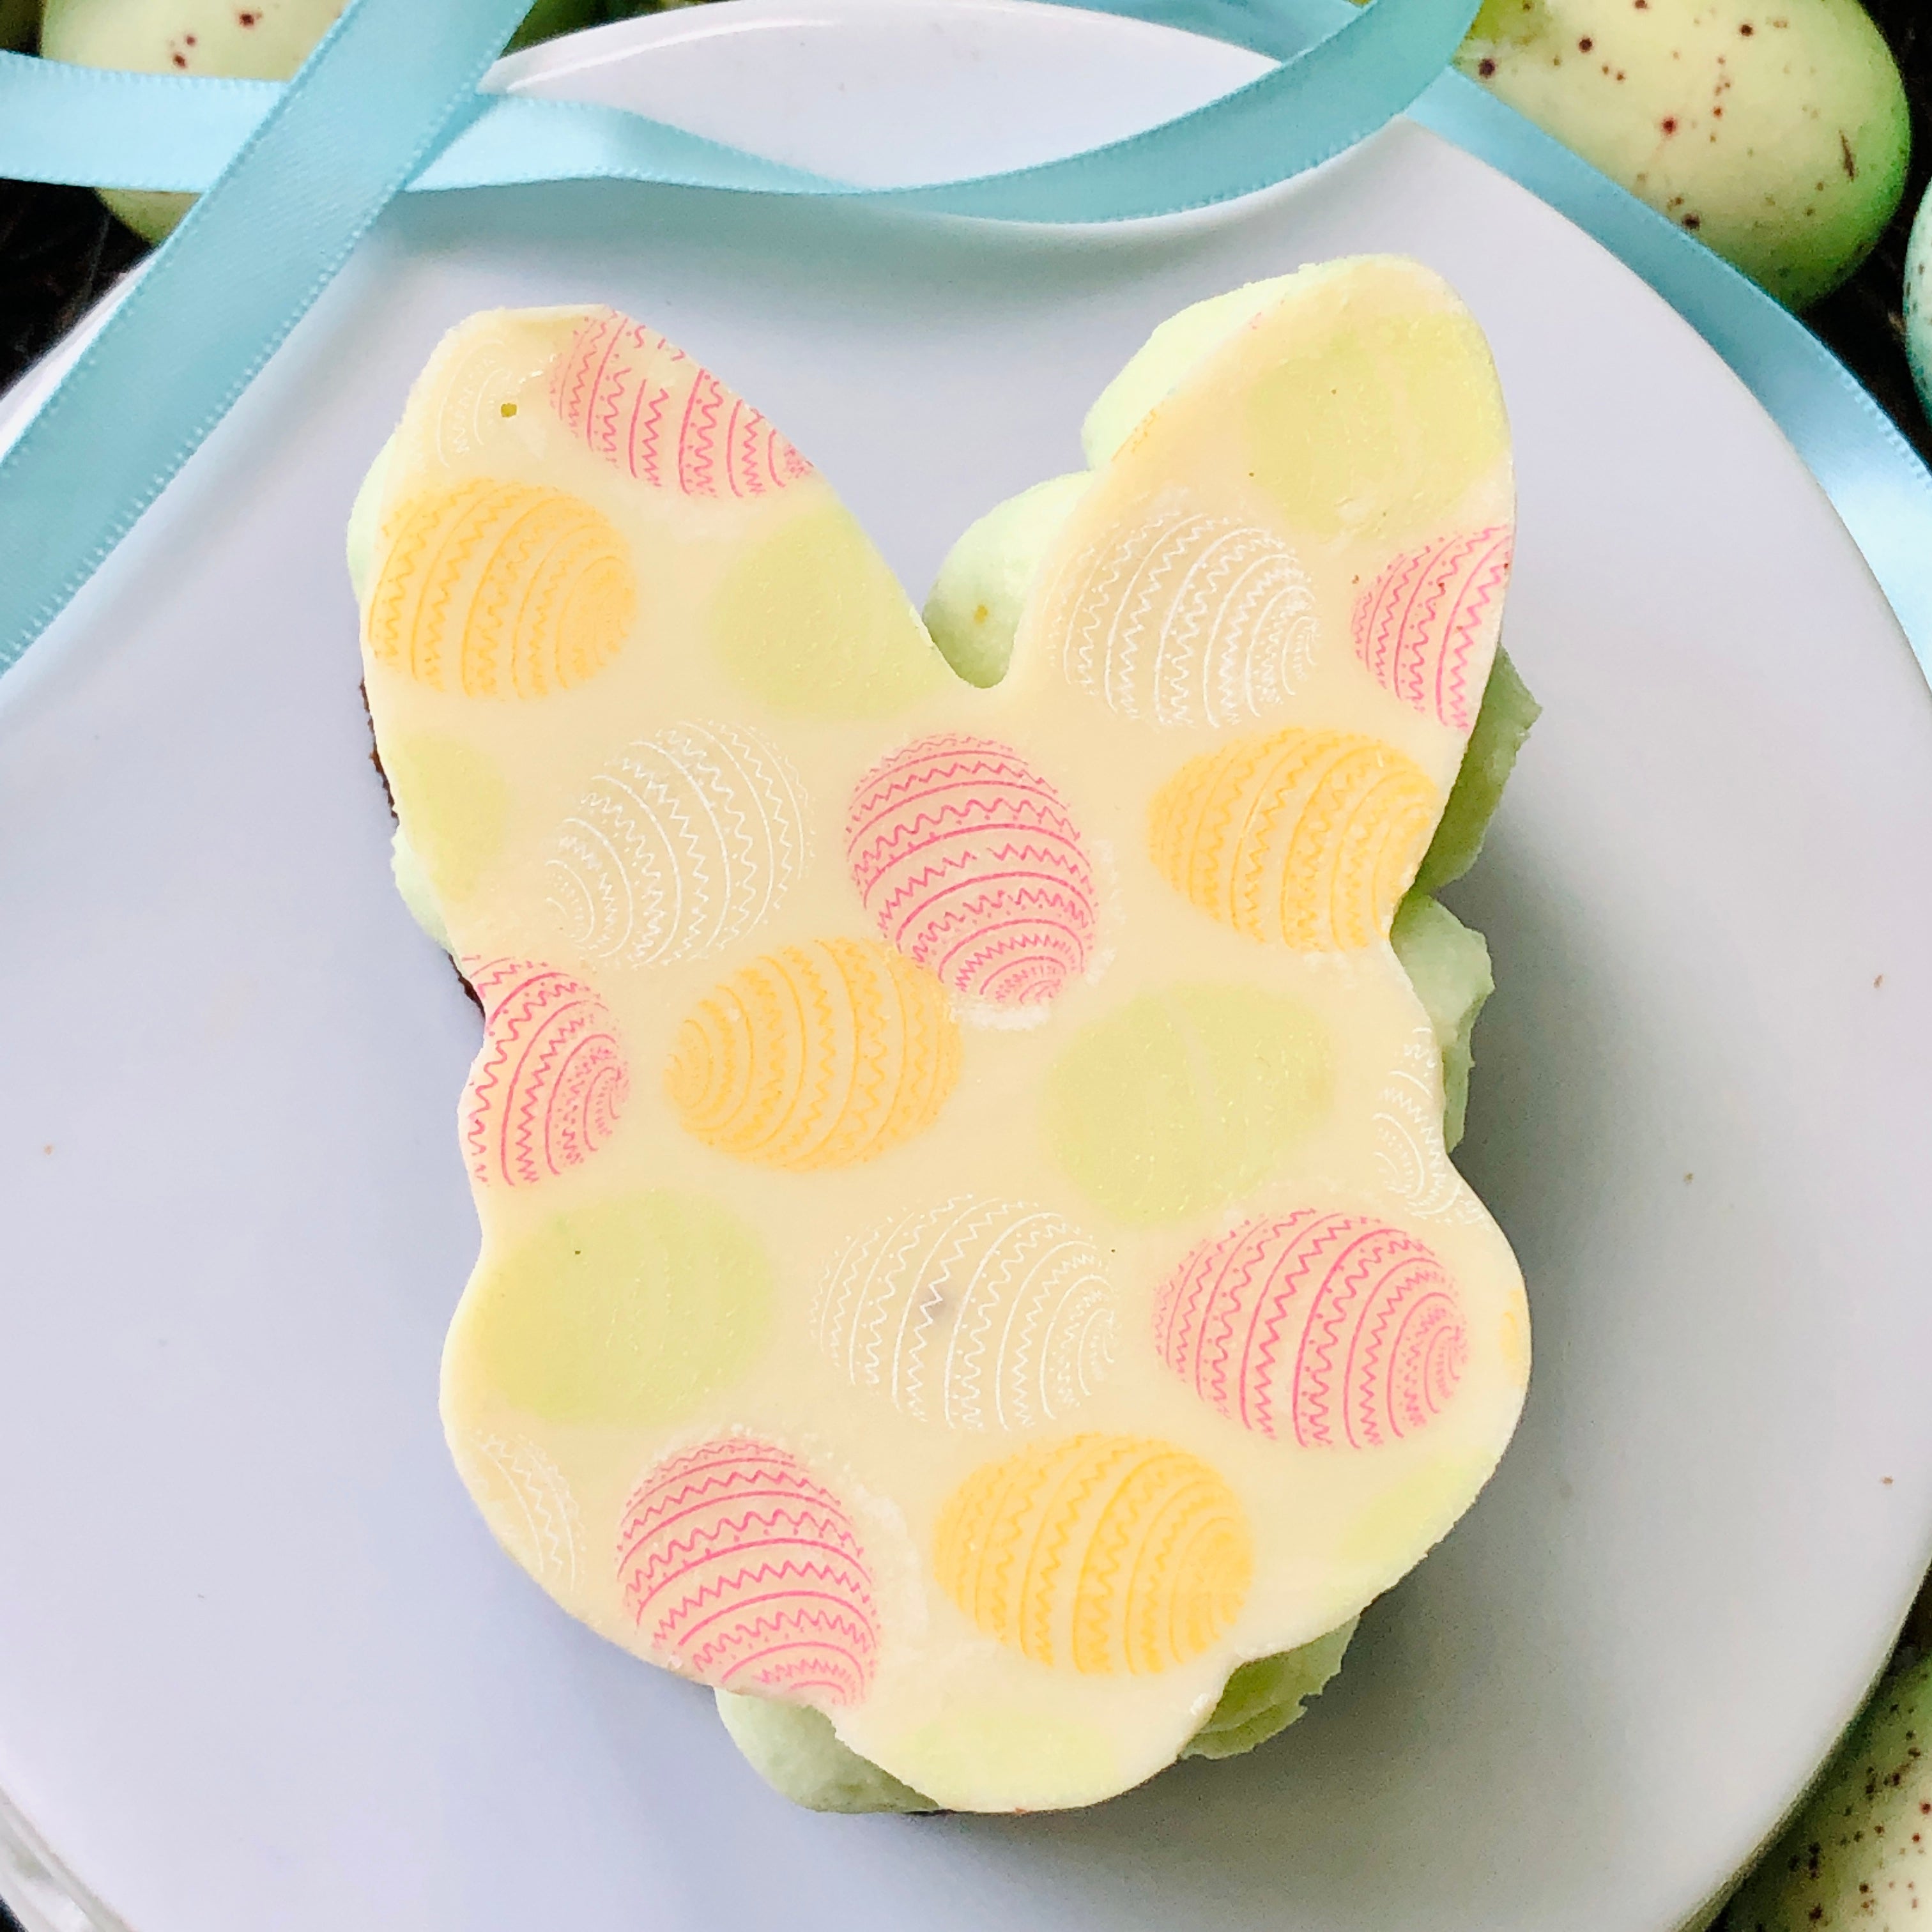 The top view of a Easter Bunny Brownie gift. Sitting on a white plate the top of the Easter gift can be seen. The top is a white chocolate Easter bunny shape with Easter egg patter on top. There are Easter Eggs in the background